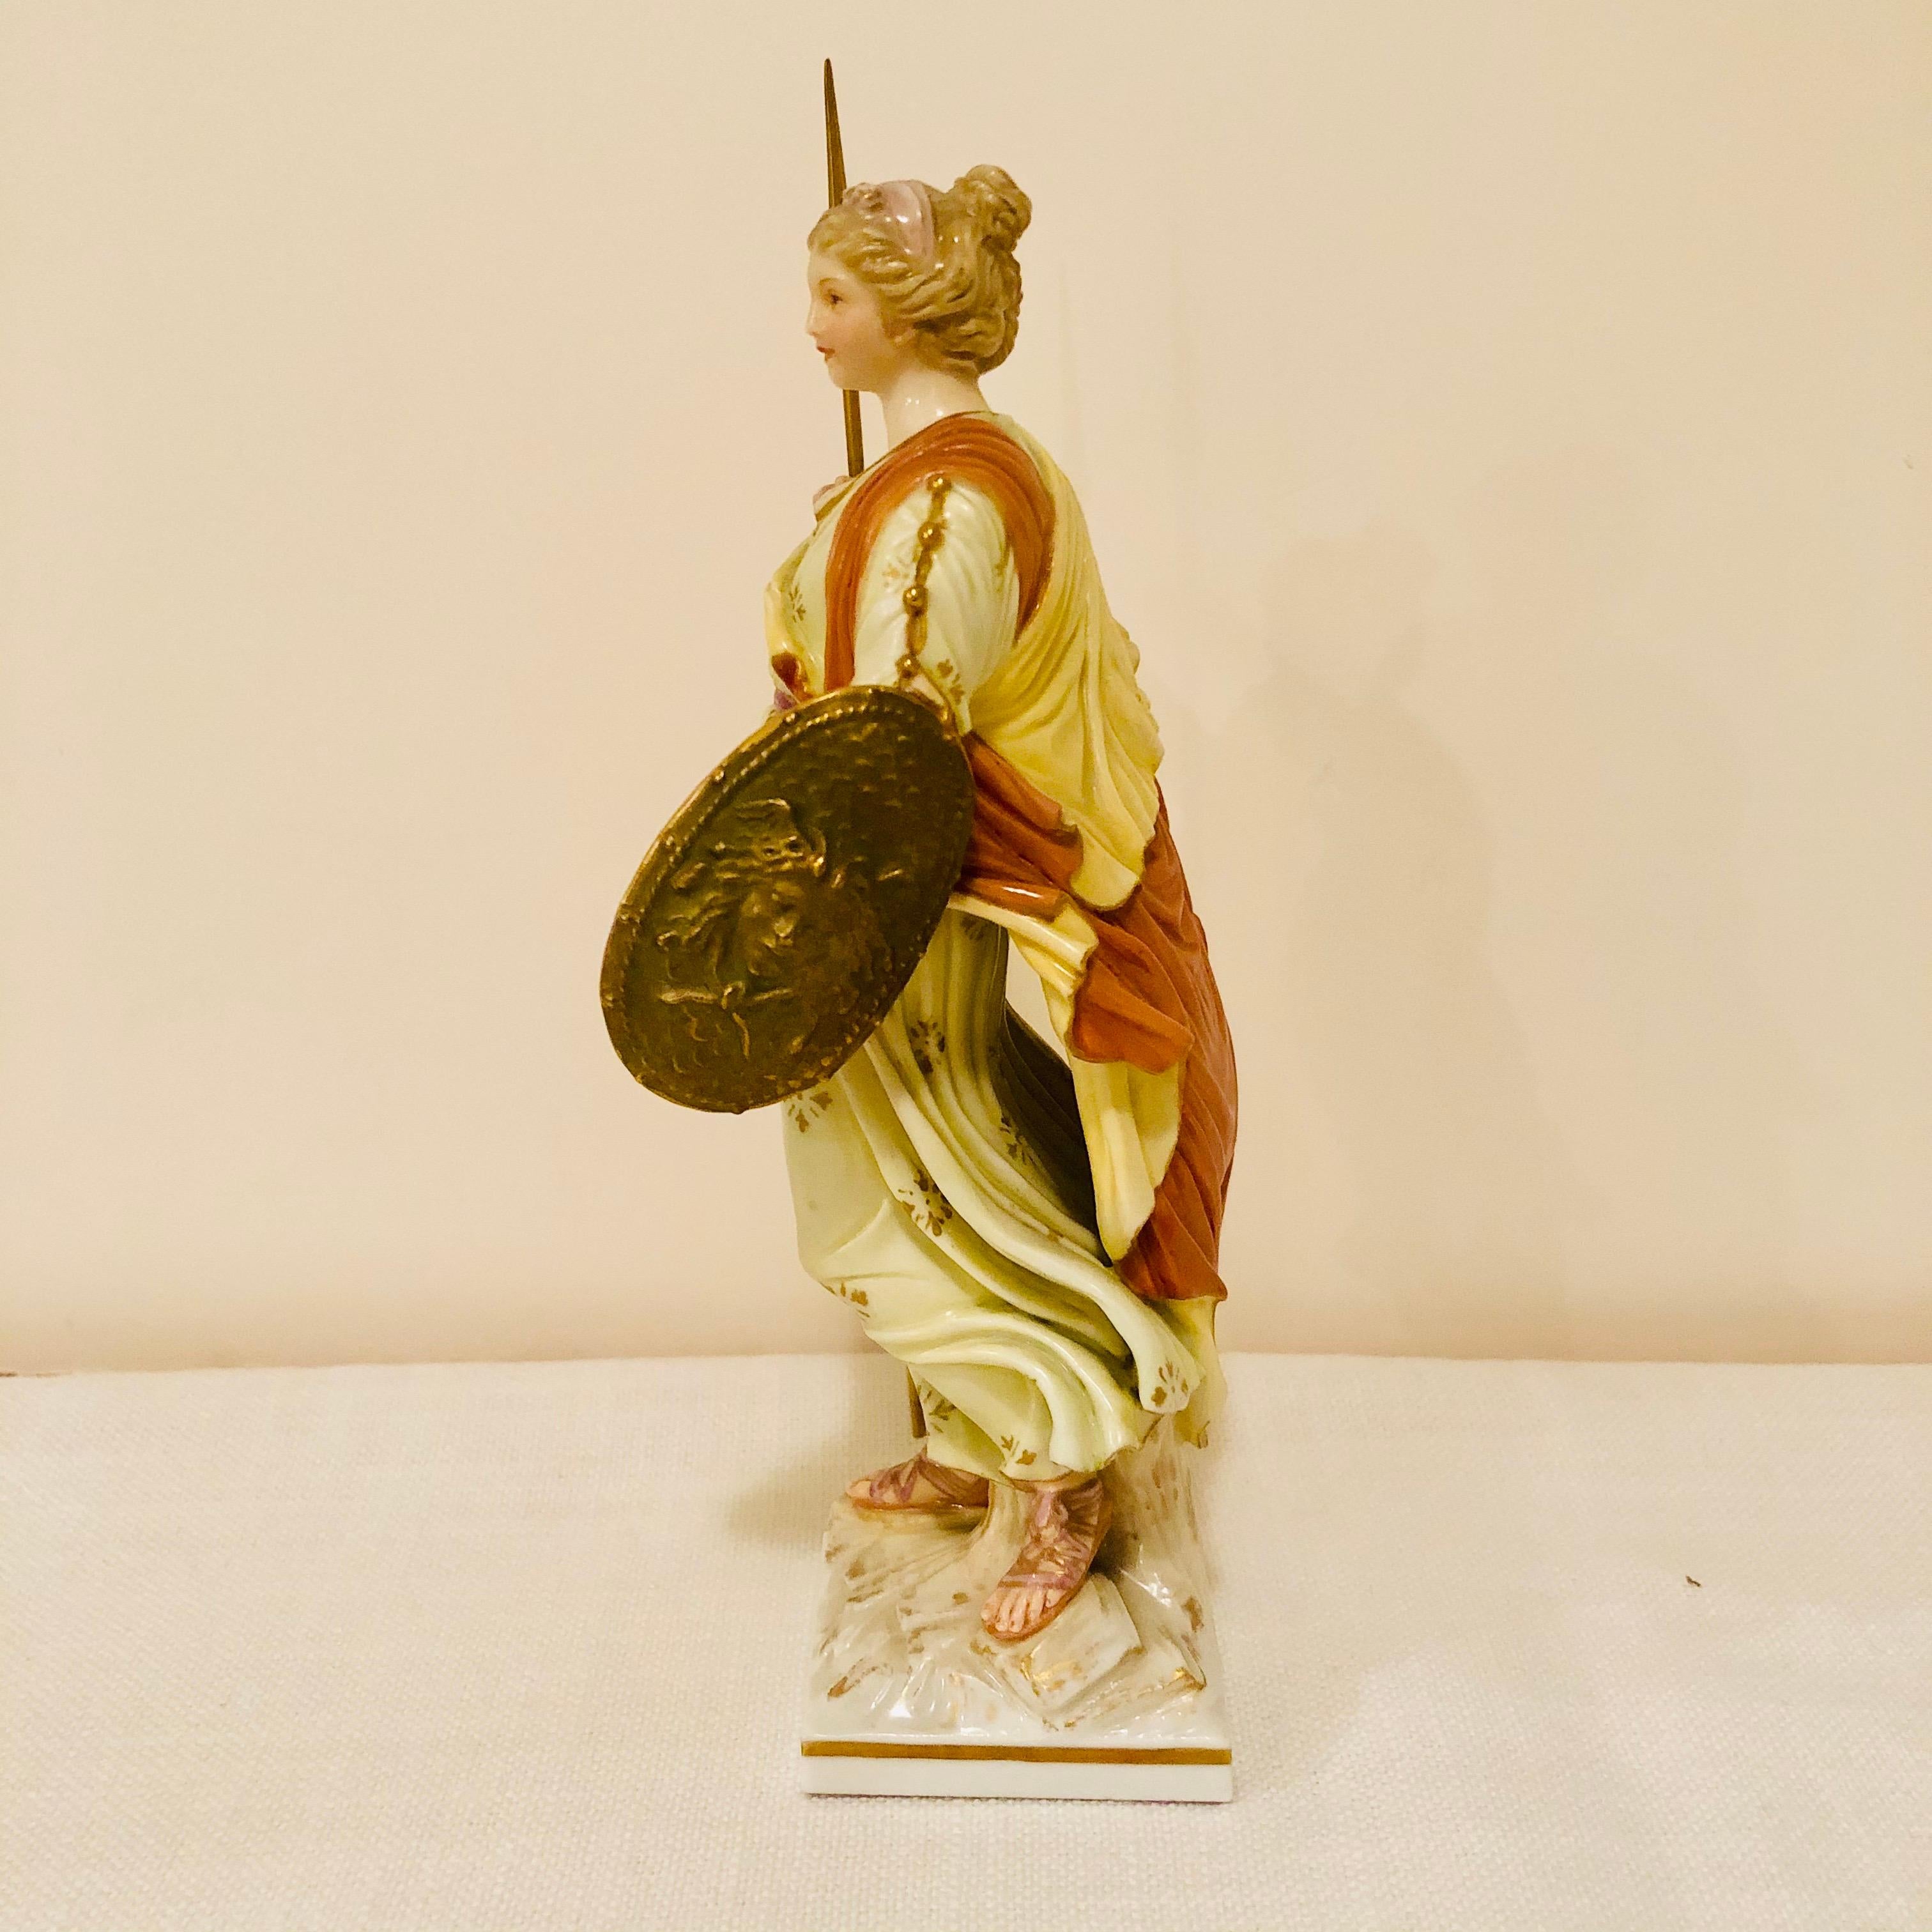 I would like to offer you this amazing KPM porcelain figurine of a lady warrior with her shield and spear. I believe she is Athena. As you can see in the pictures, her shield has a raised face with wings on the head of the face. I think this shield